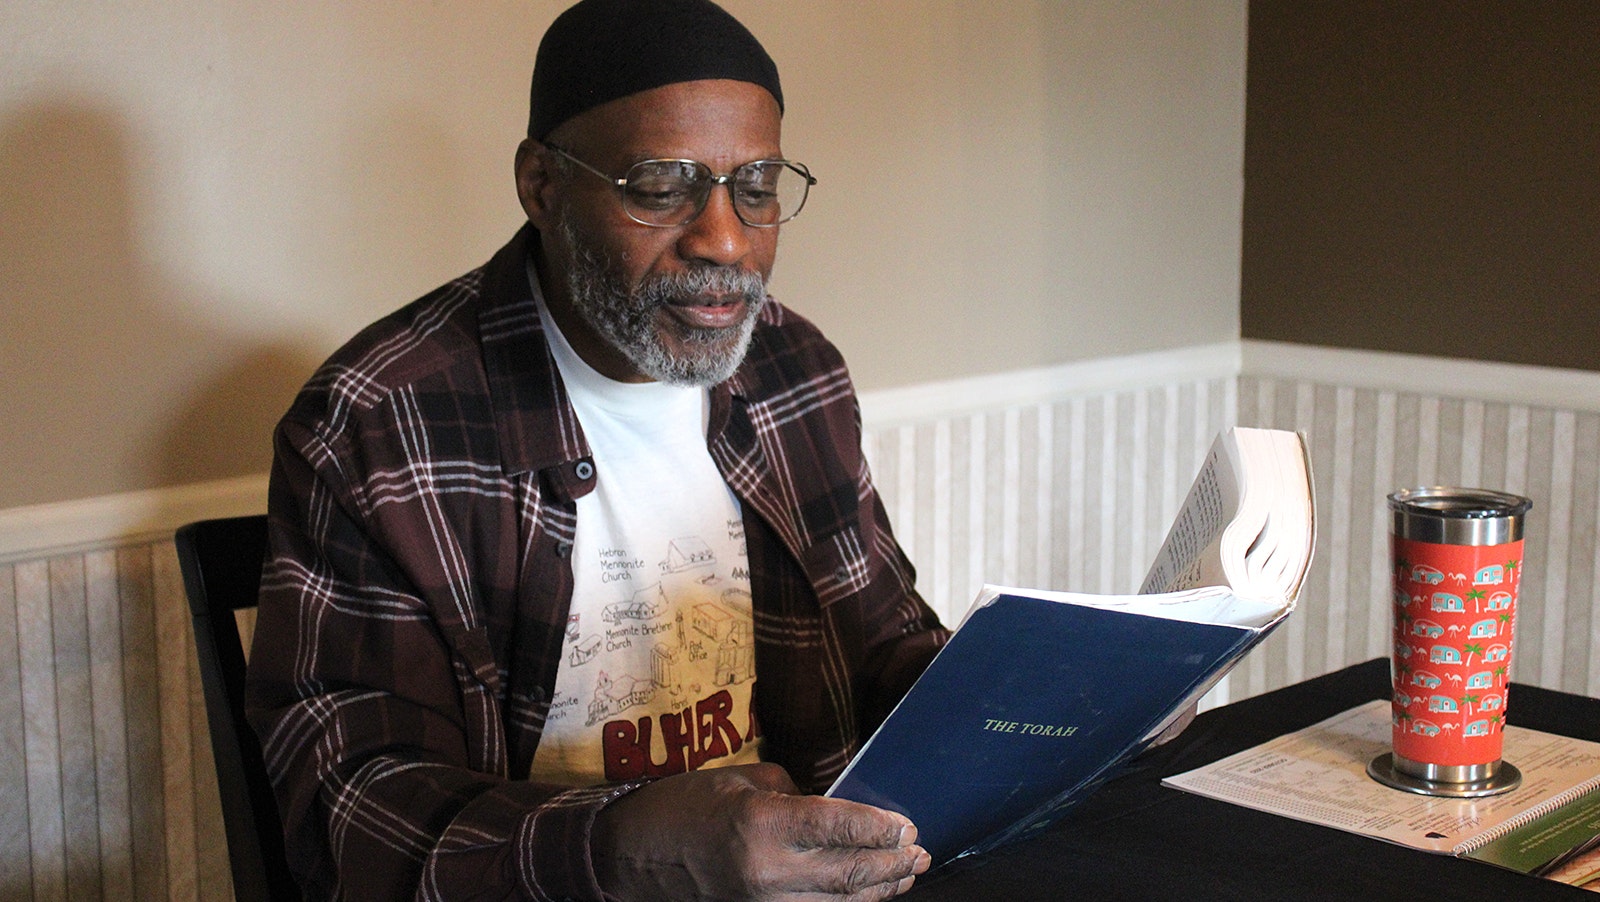 Clarence Fisher reads the Torah at a local Cheyenne coffee shop. He said finding God saved his soul and changed his perspective on life. After 32 years in prison, he's now living his best second life.